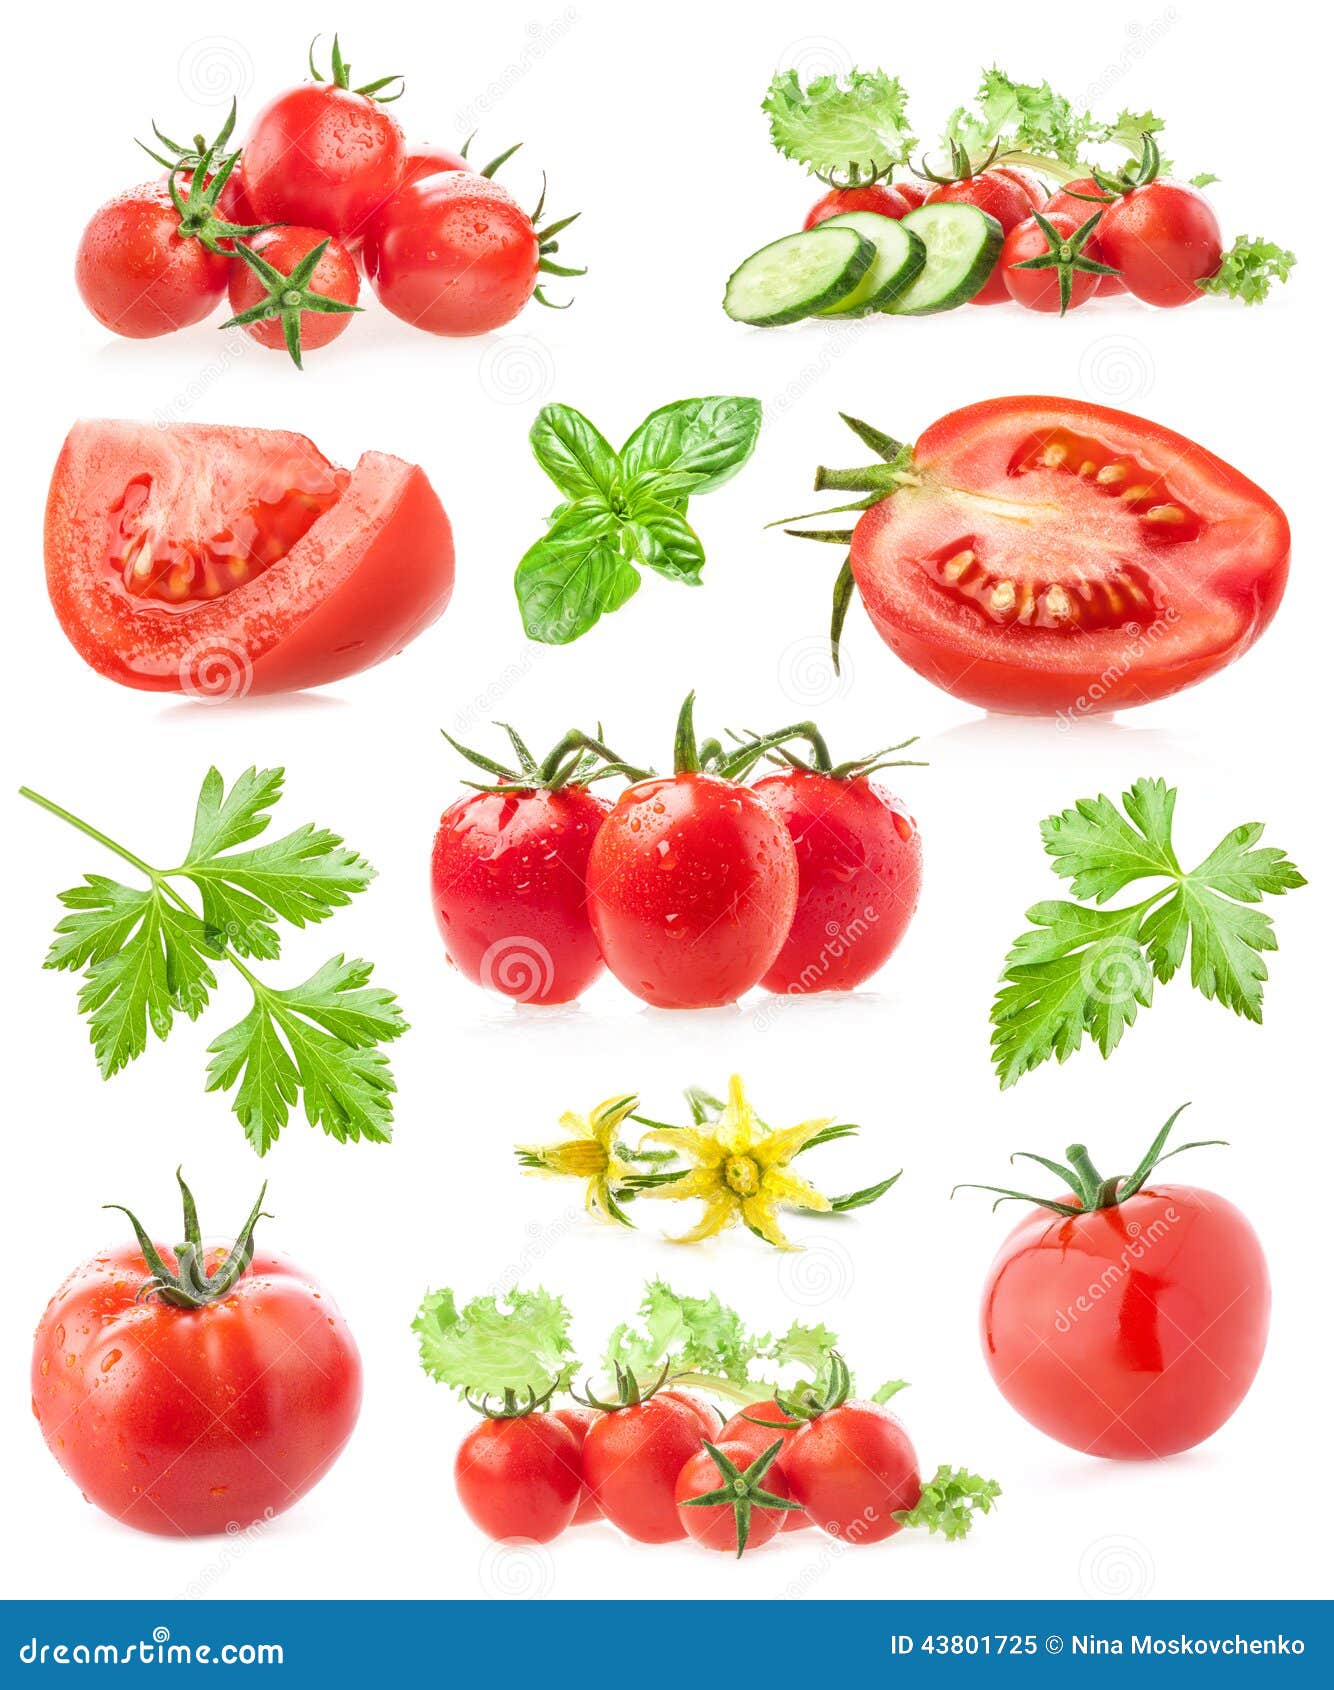 collections of tomatoes